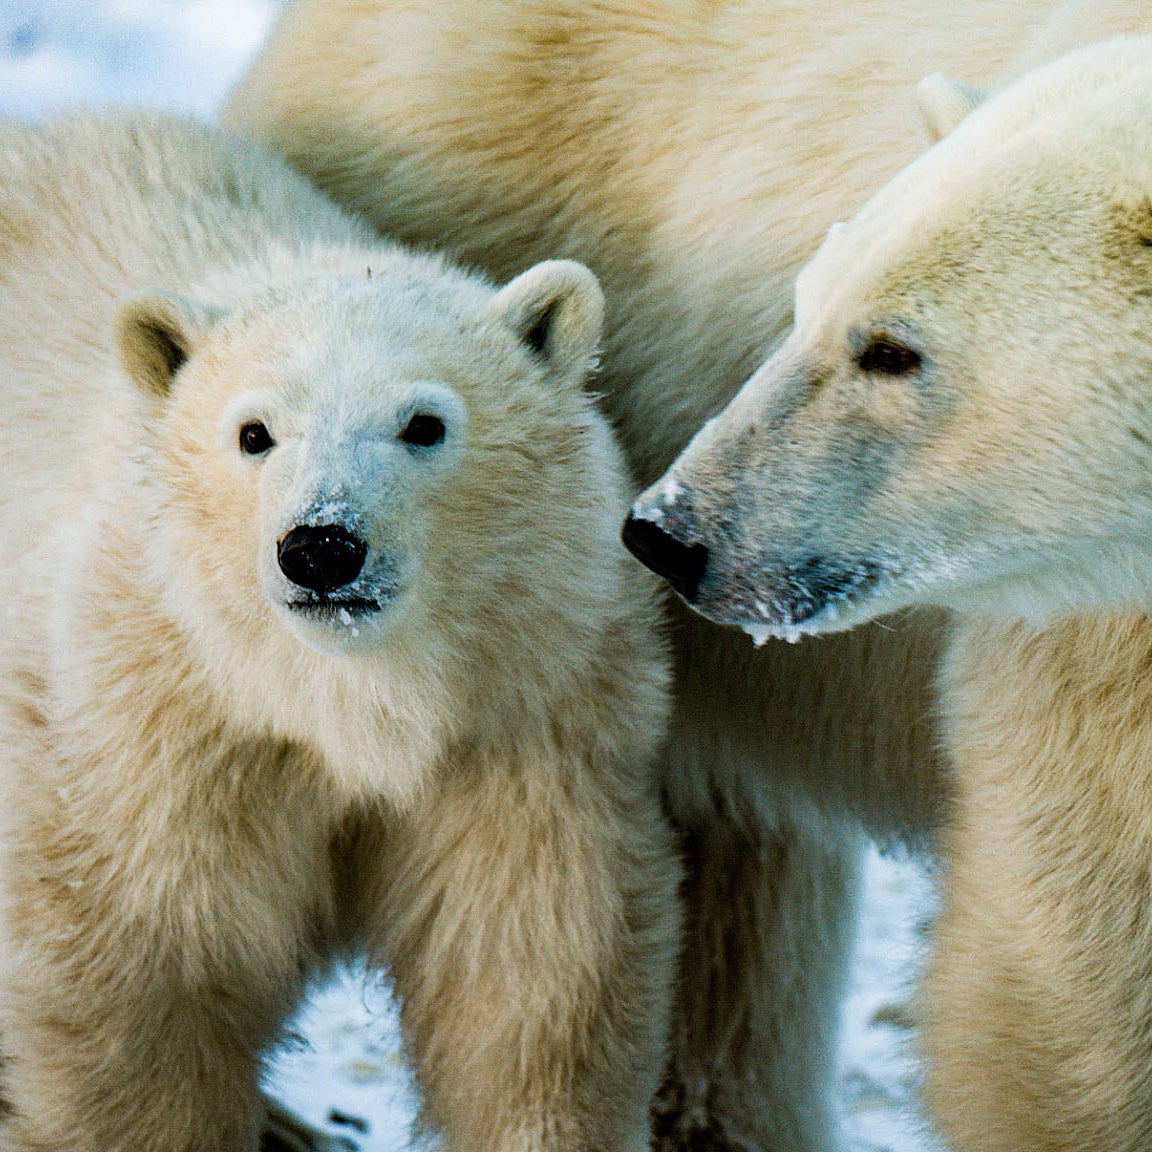 With Drilling ANWR a Go, Polar Bears Will Suffer